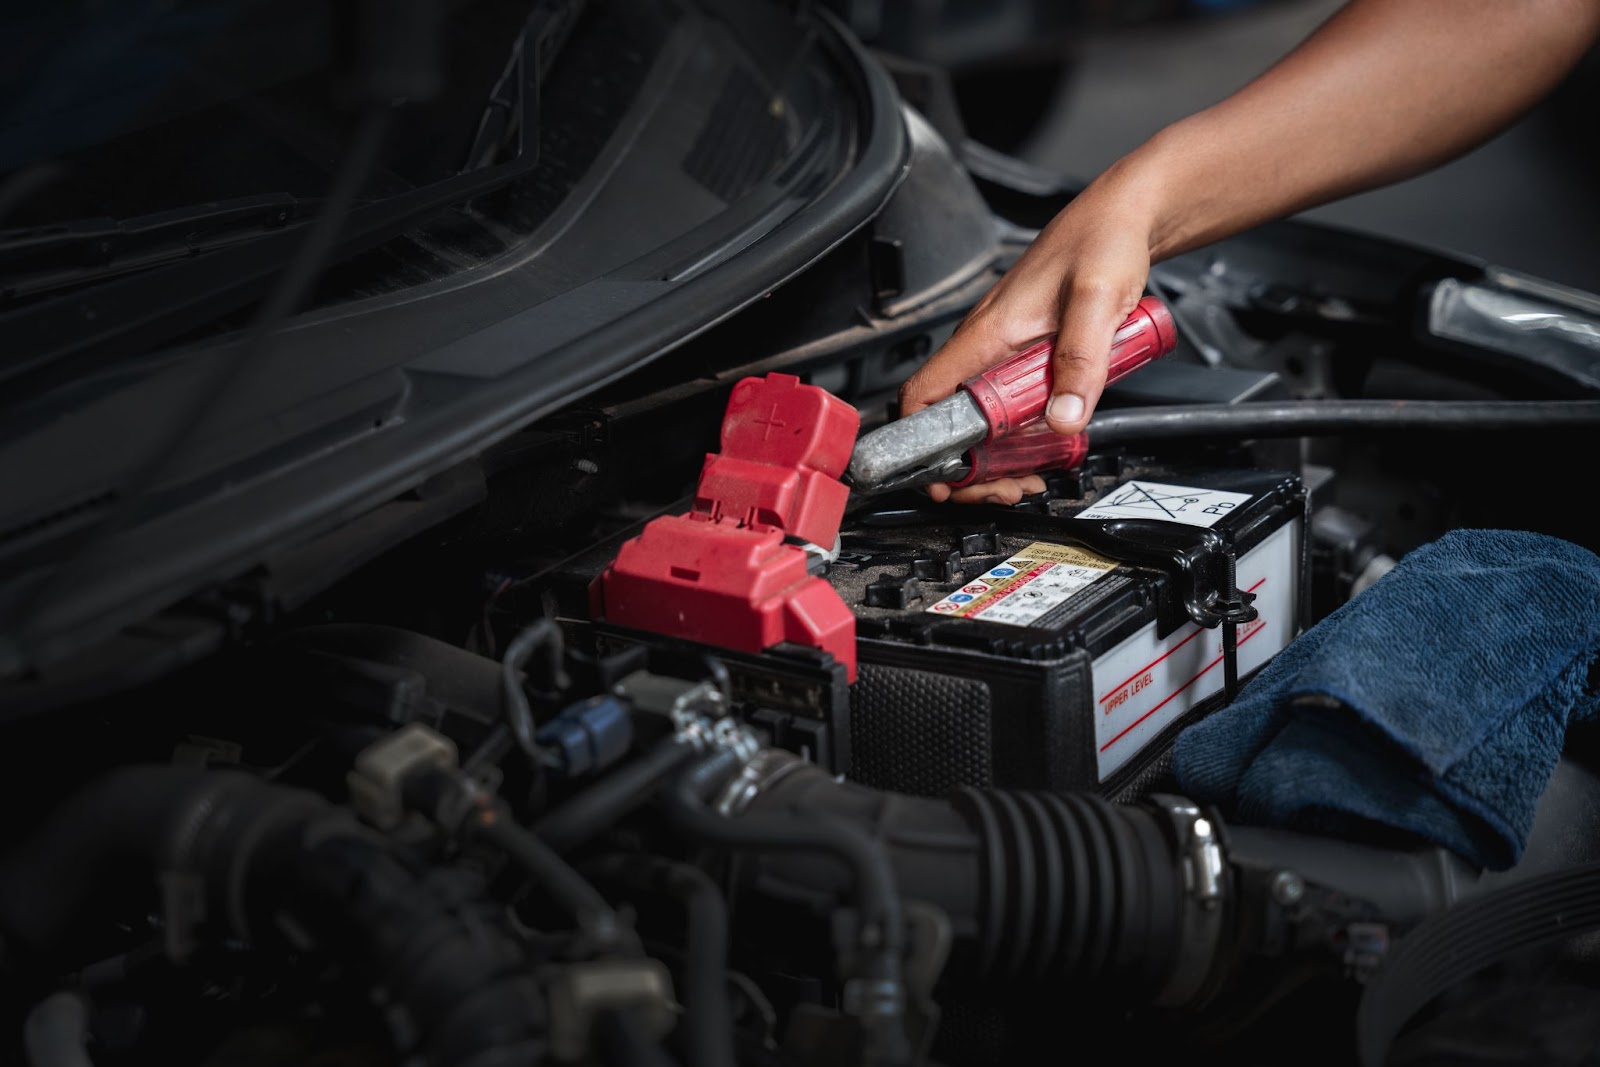 How To Spot Electrical System Problems in Your Car